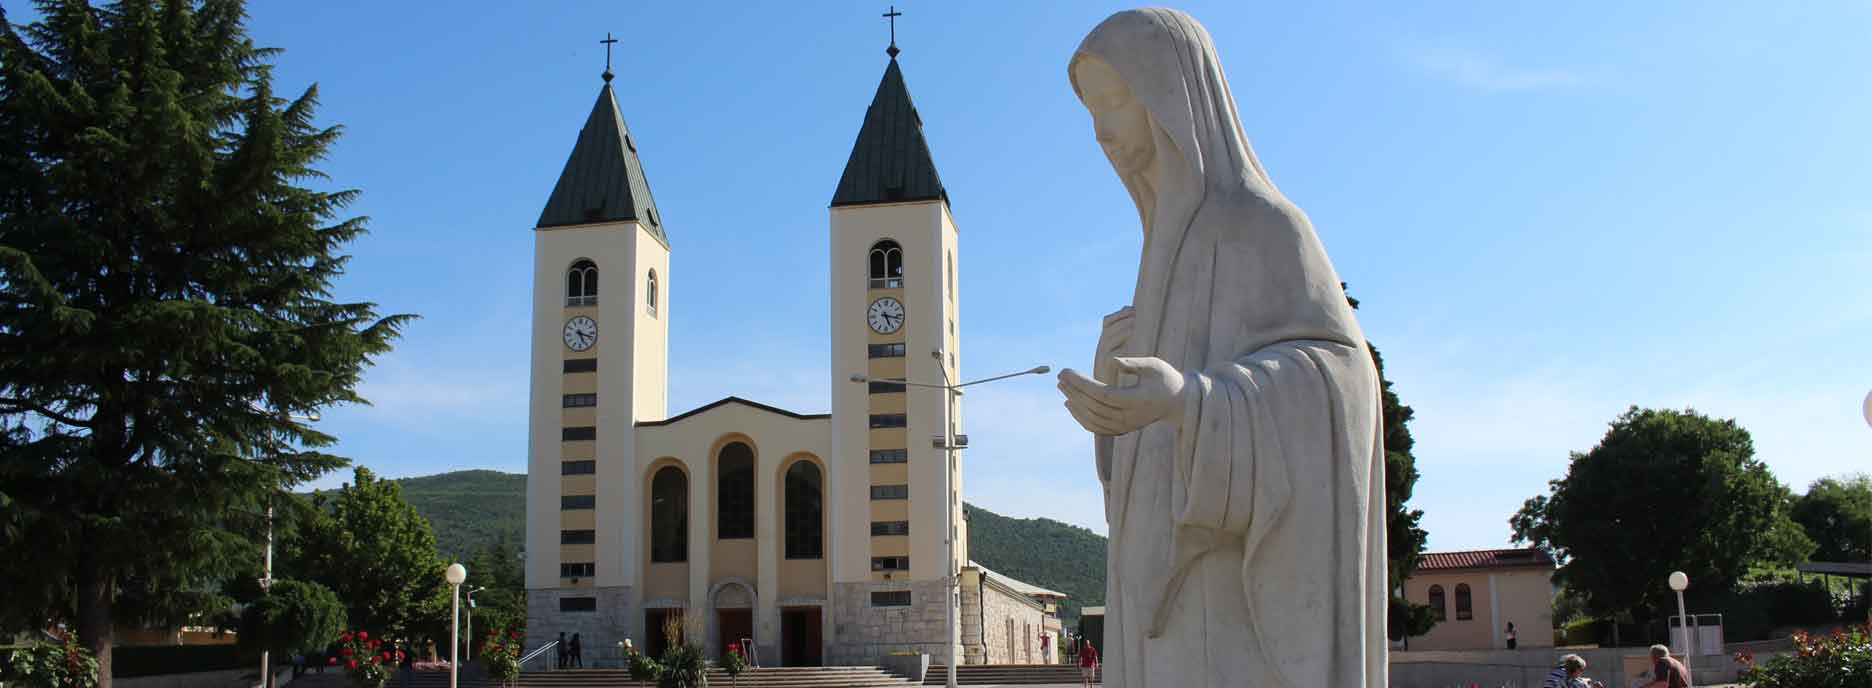 St. James in Medjugorje with Blessed Virgin Mary Statue